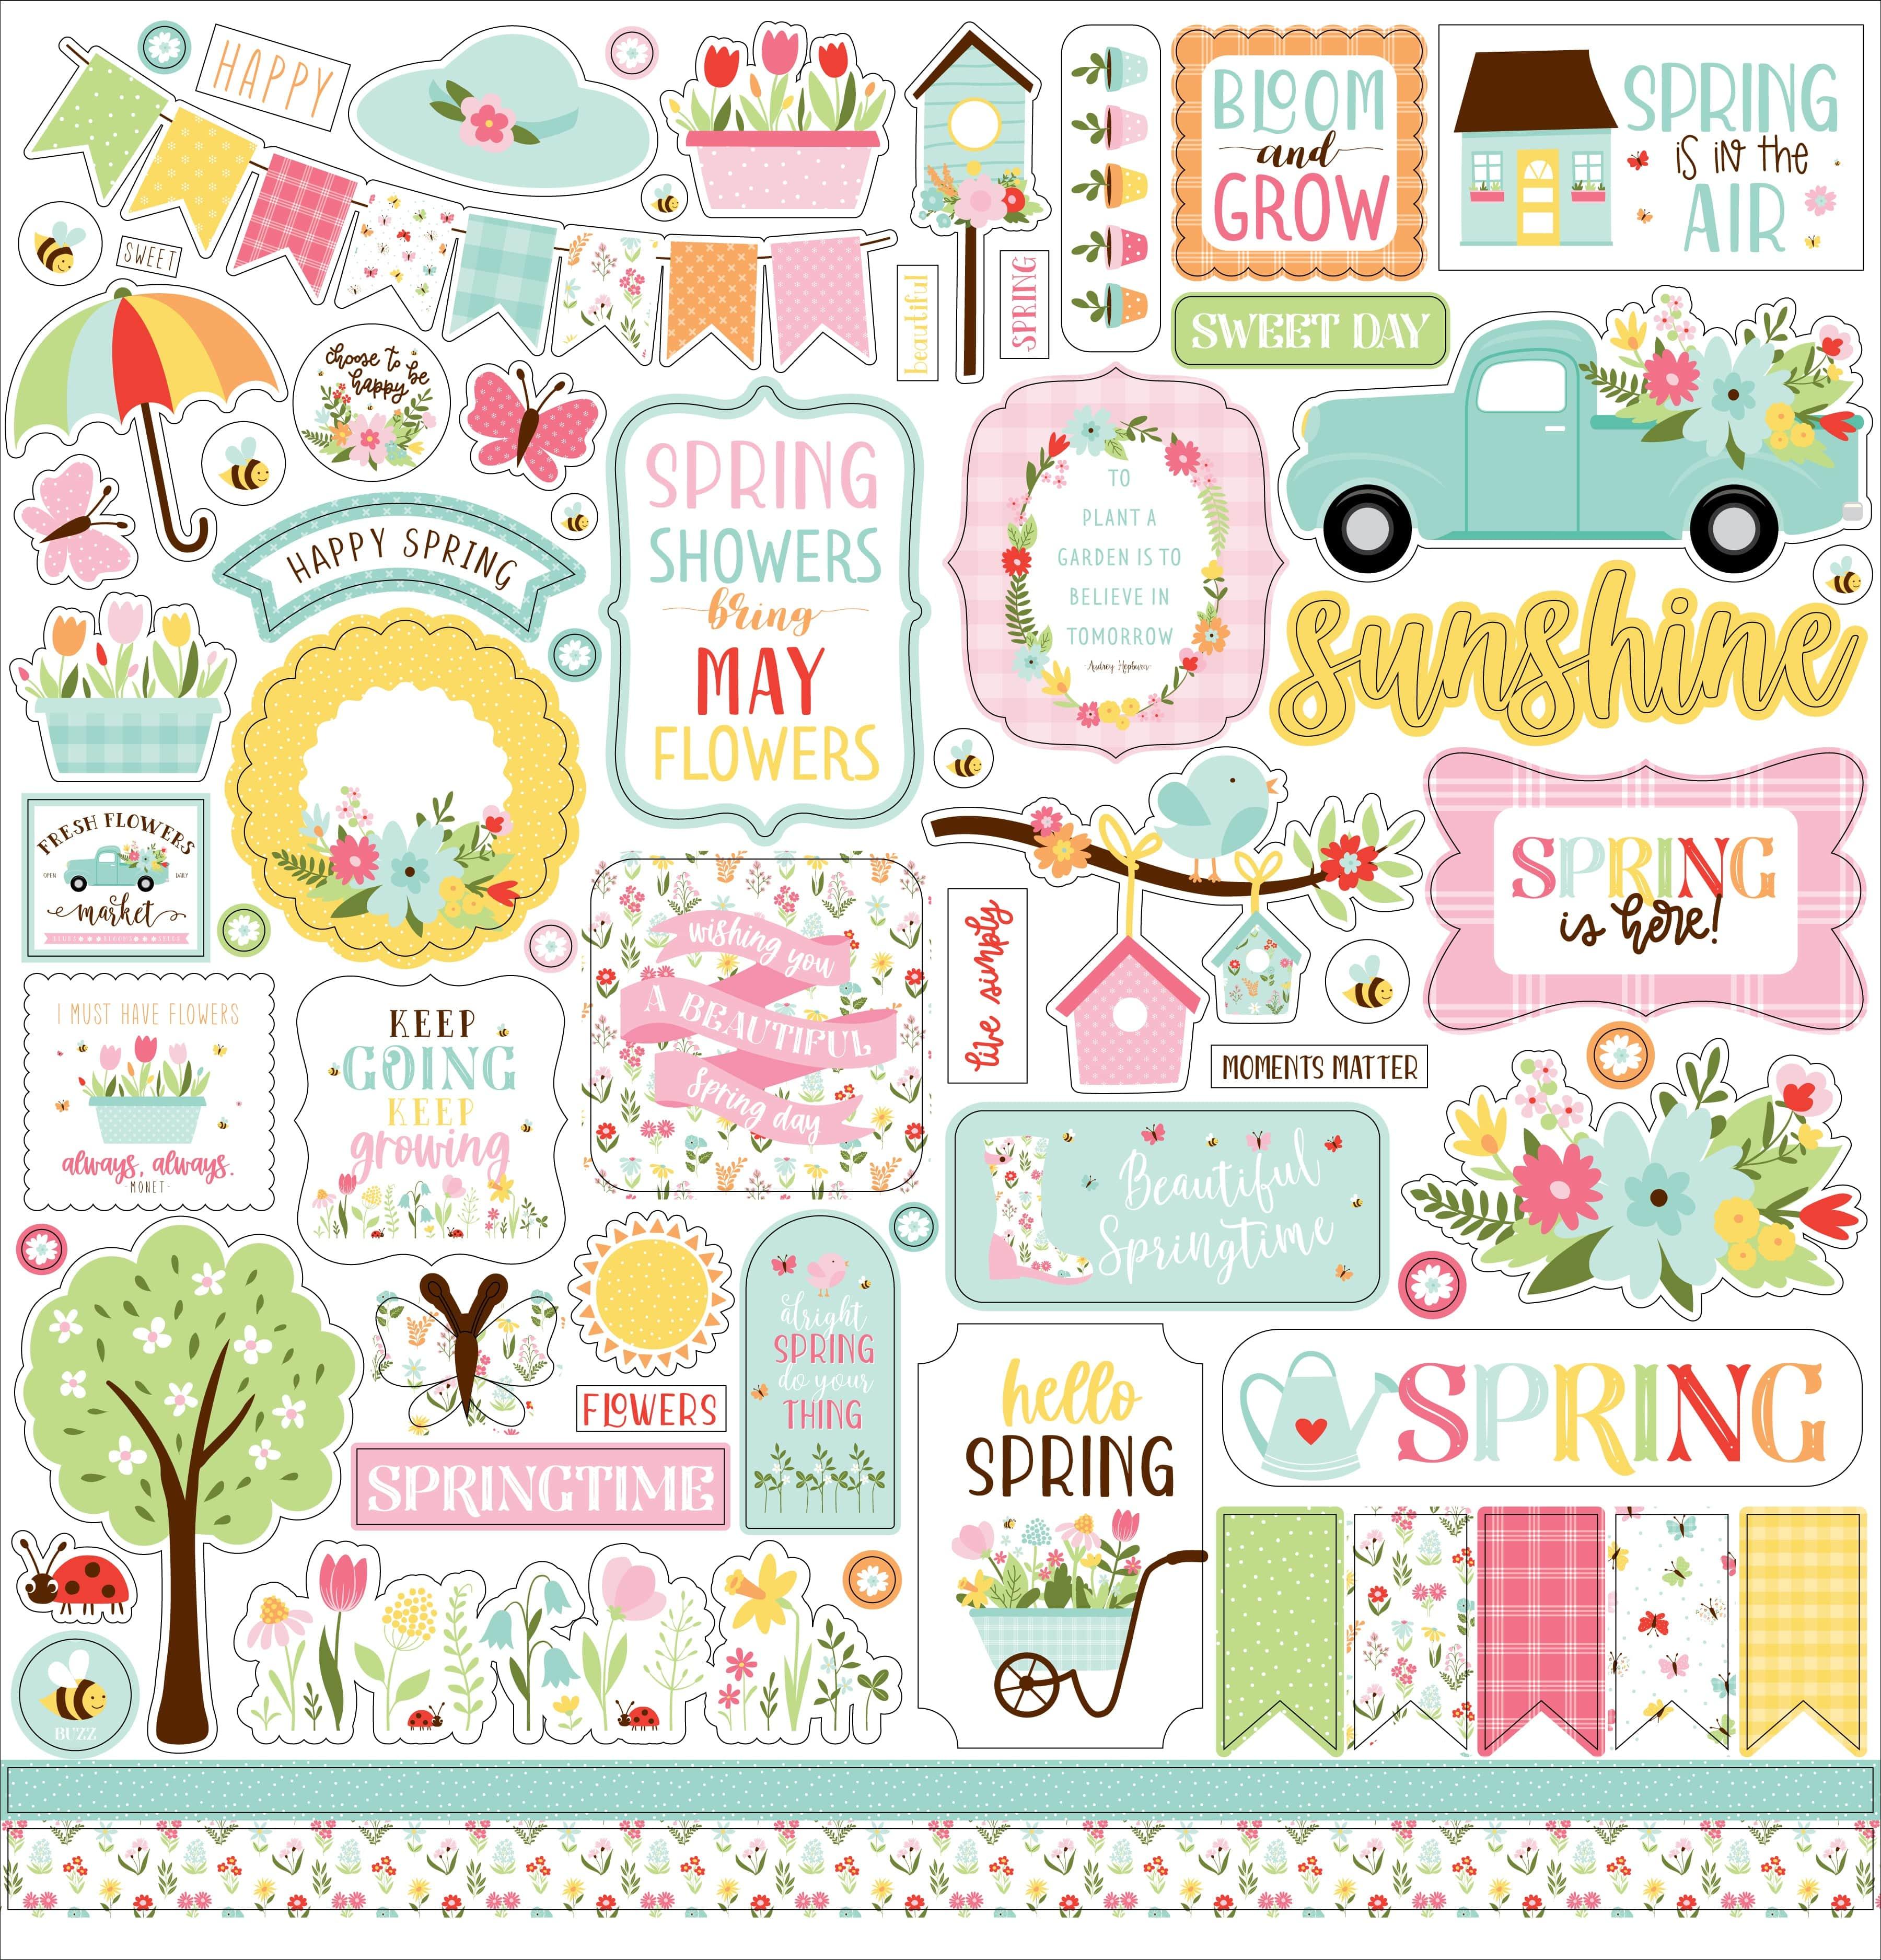 Welcome Spring Collection 12 x 12 Scrapbook Sticker Sheet by Echo Park Paper - Scrapbook Supply Companies